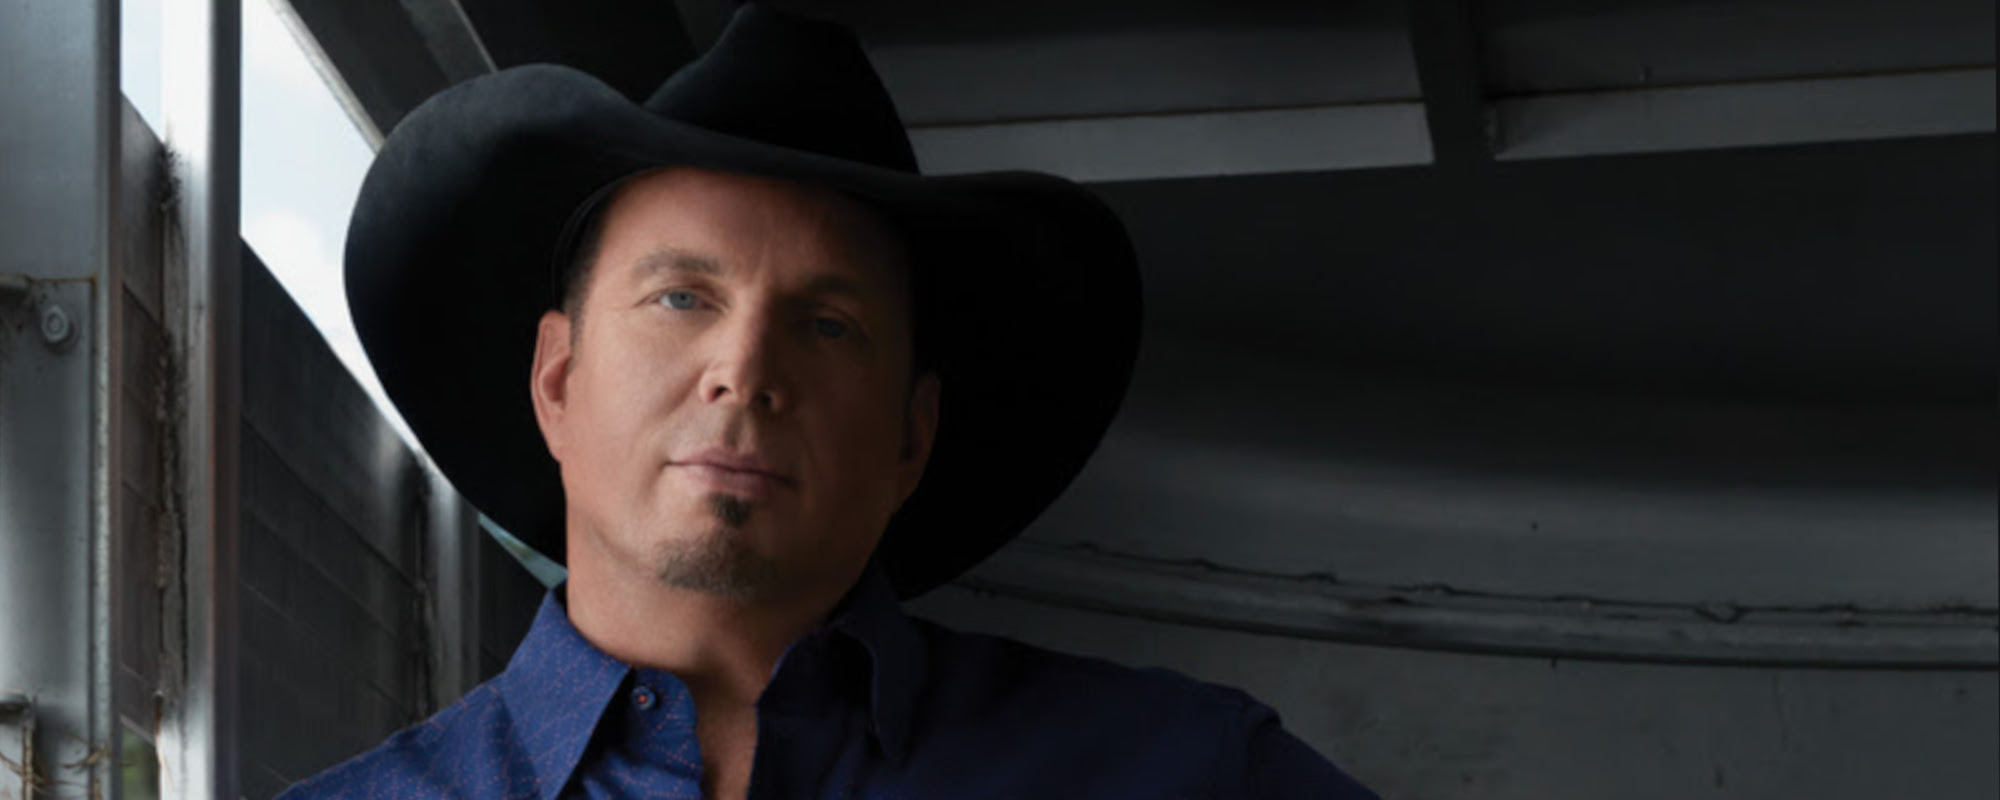 Garth Brooks Cancels Five Shows Due To Rising COVID-19 Rates